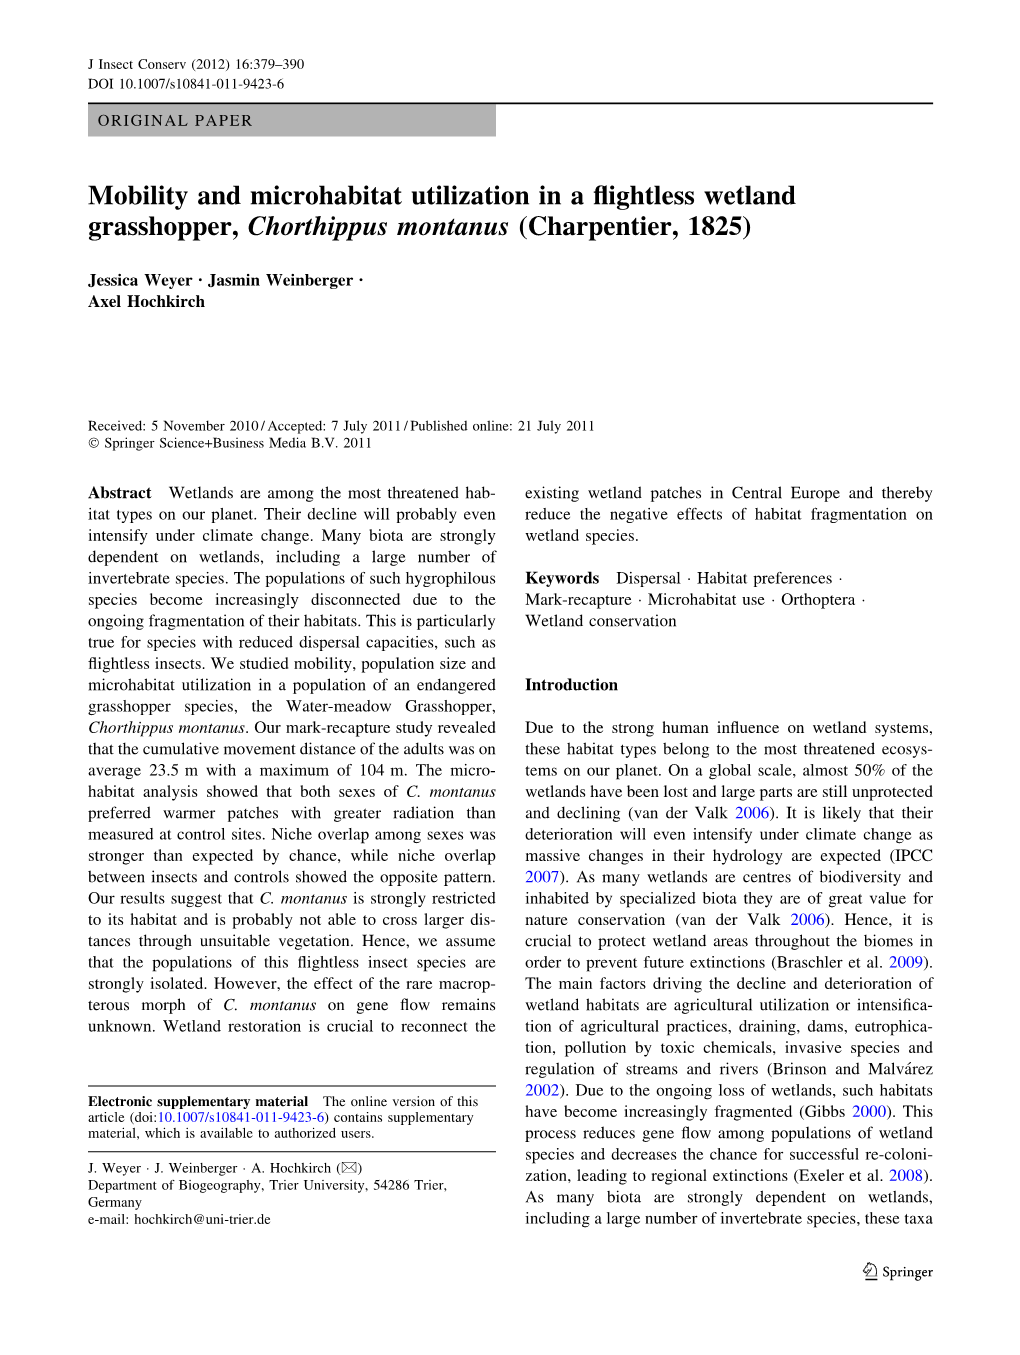 Mobility and Microhabitat Utilization in a Flightless Wetland